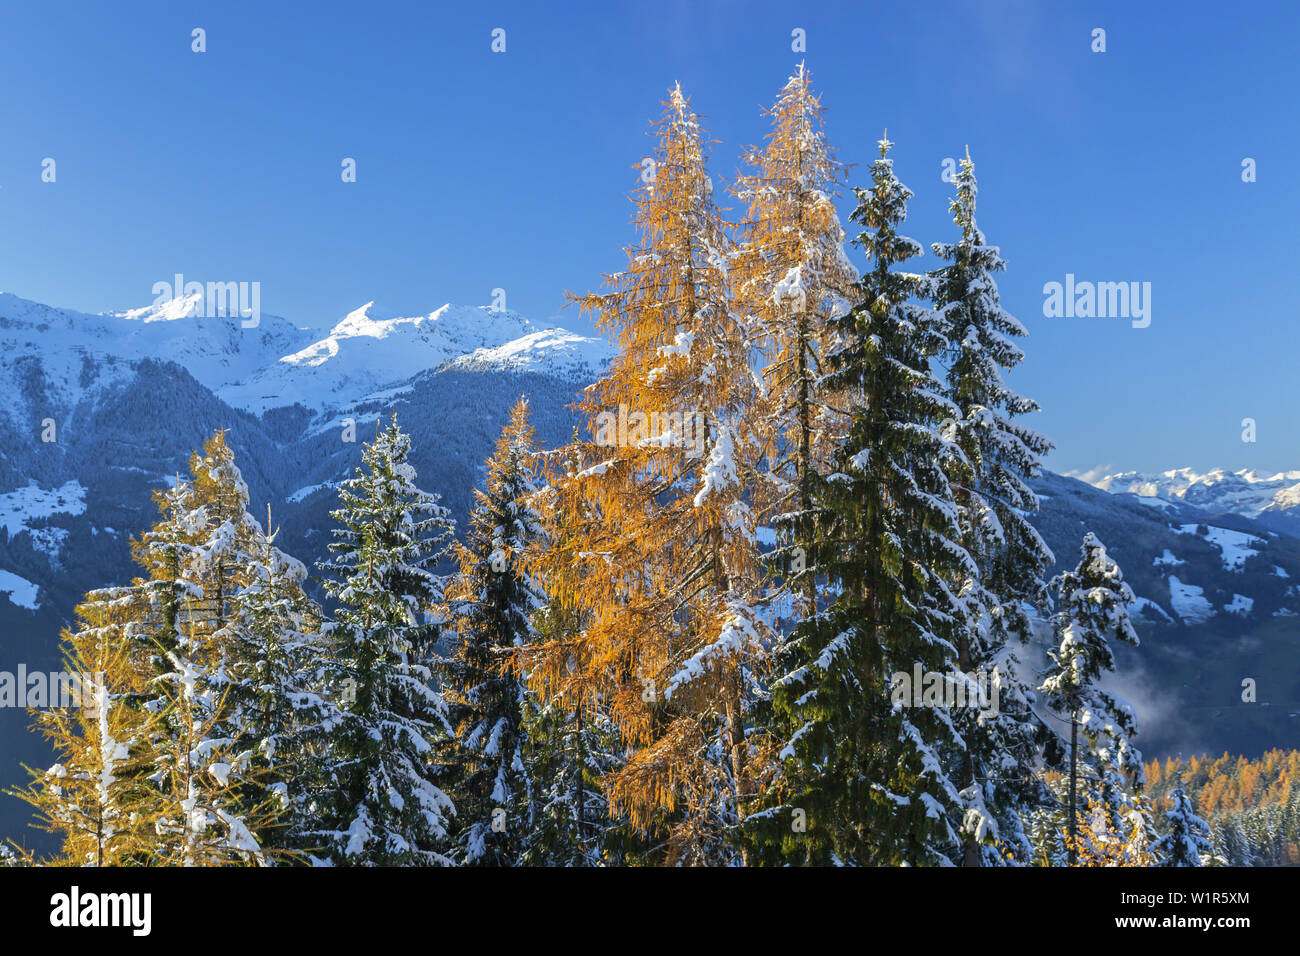 Mountain forest in the Zillertal Alps with view to Marchkopf mountain in the Tuxer Alps, Ramsberg, Hippach, Zell am Ziller, Tirol, Austria, Europe Stock Photo